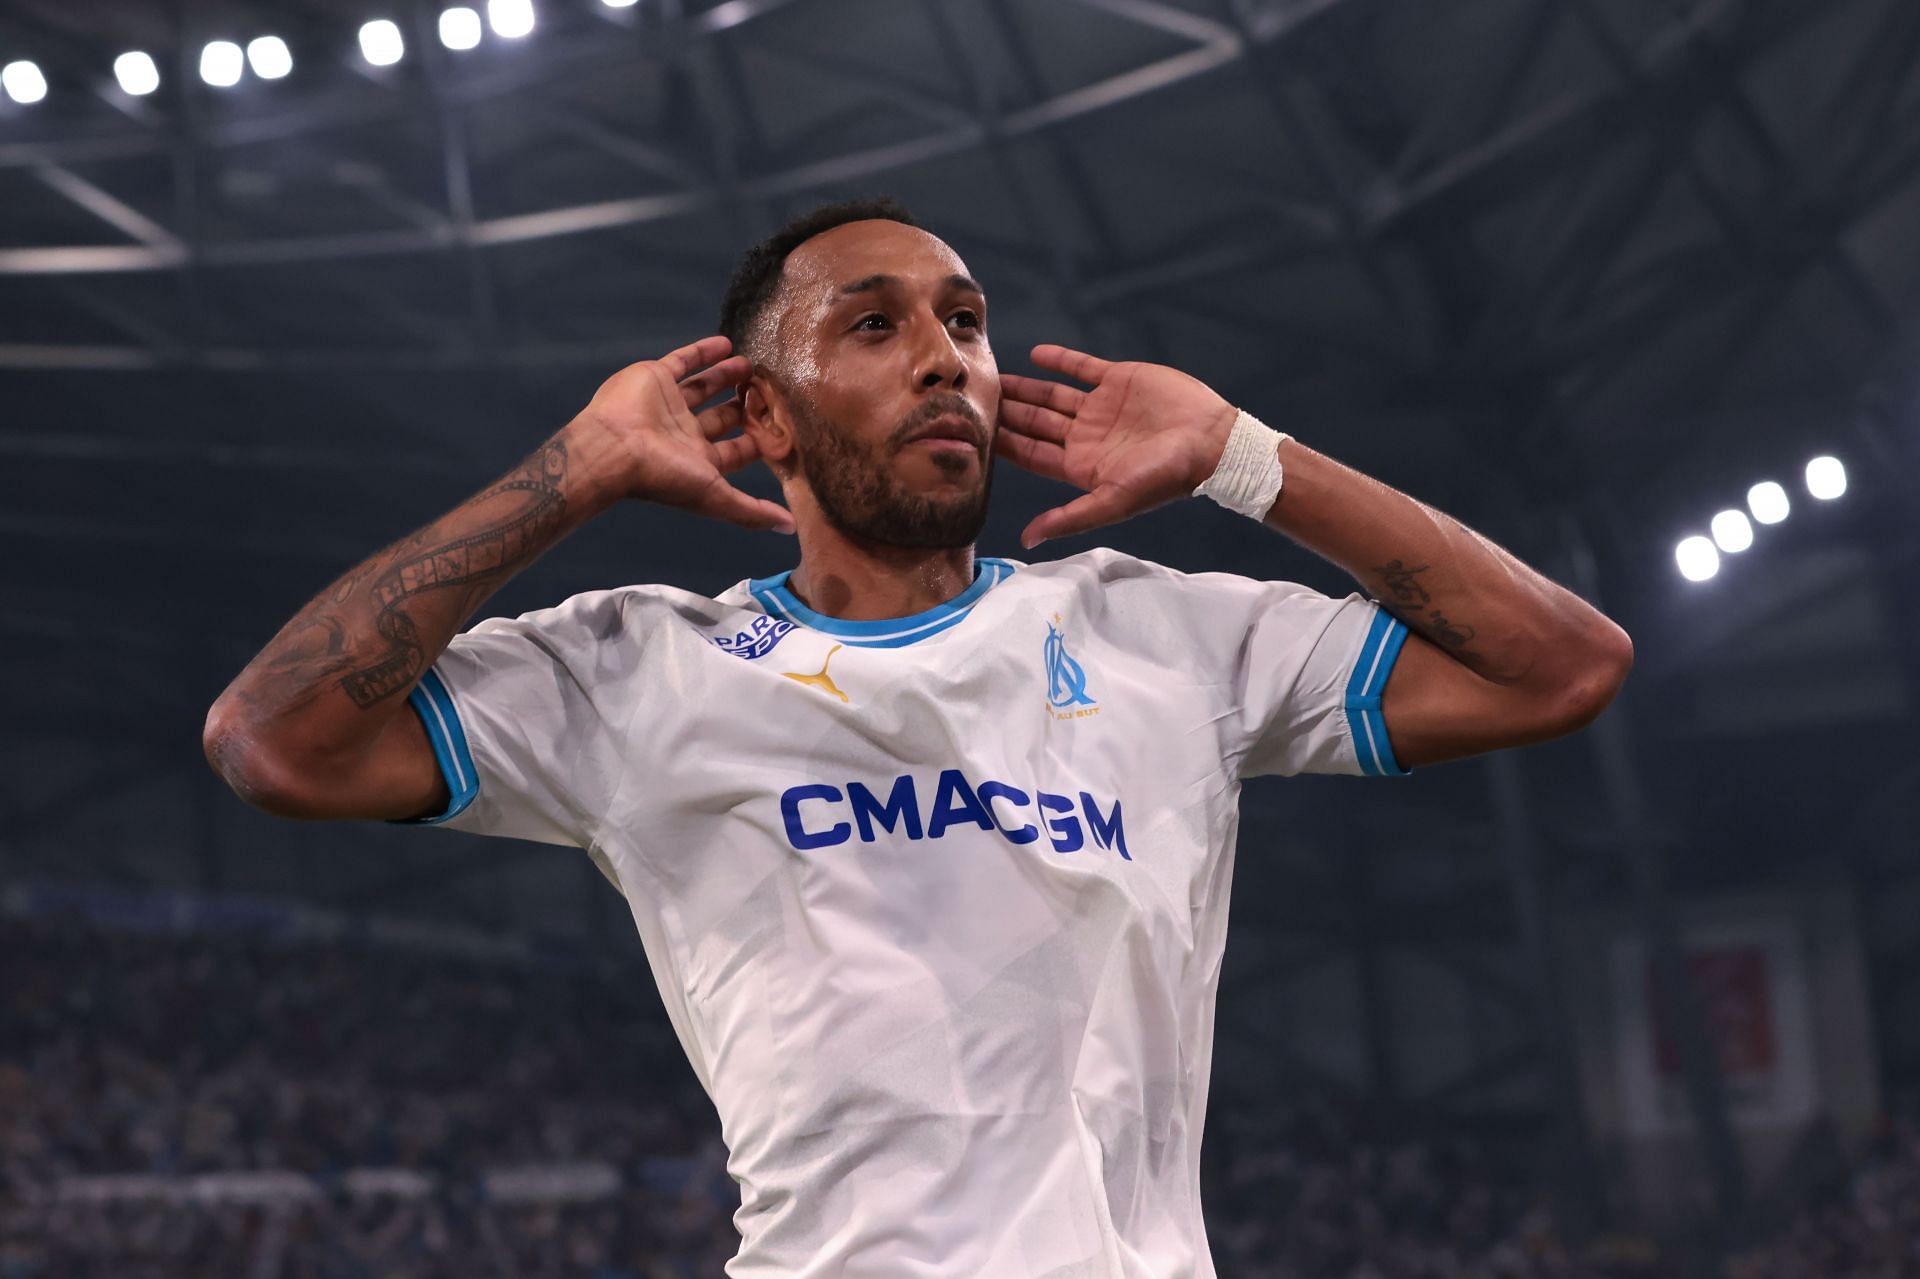 Marseille will meet Nantes in Ligue 1 on Friday